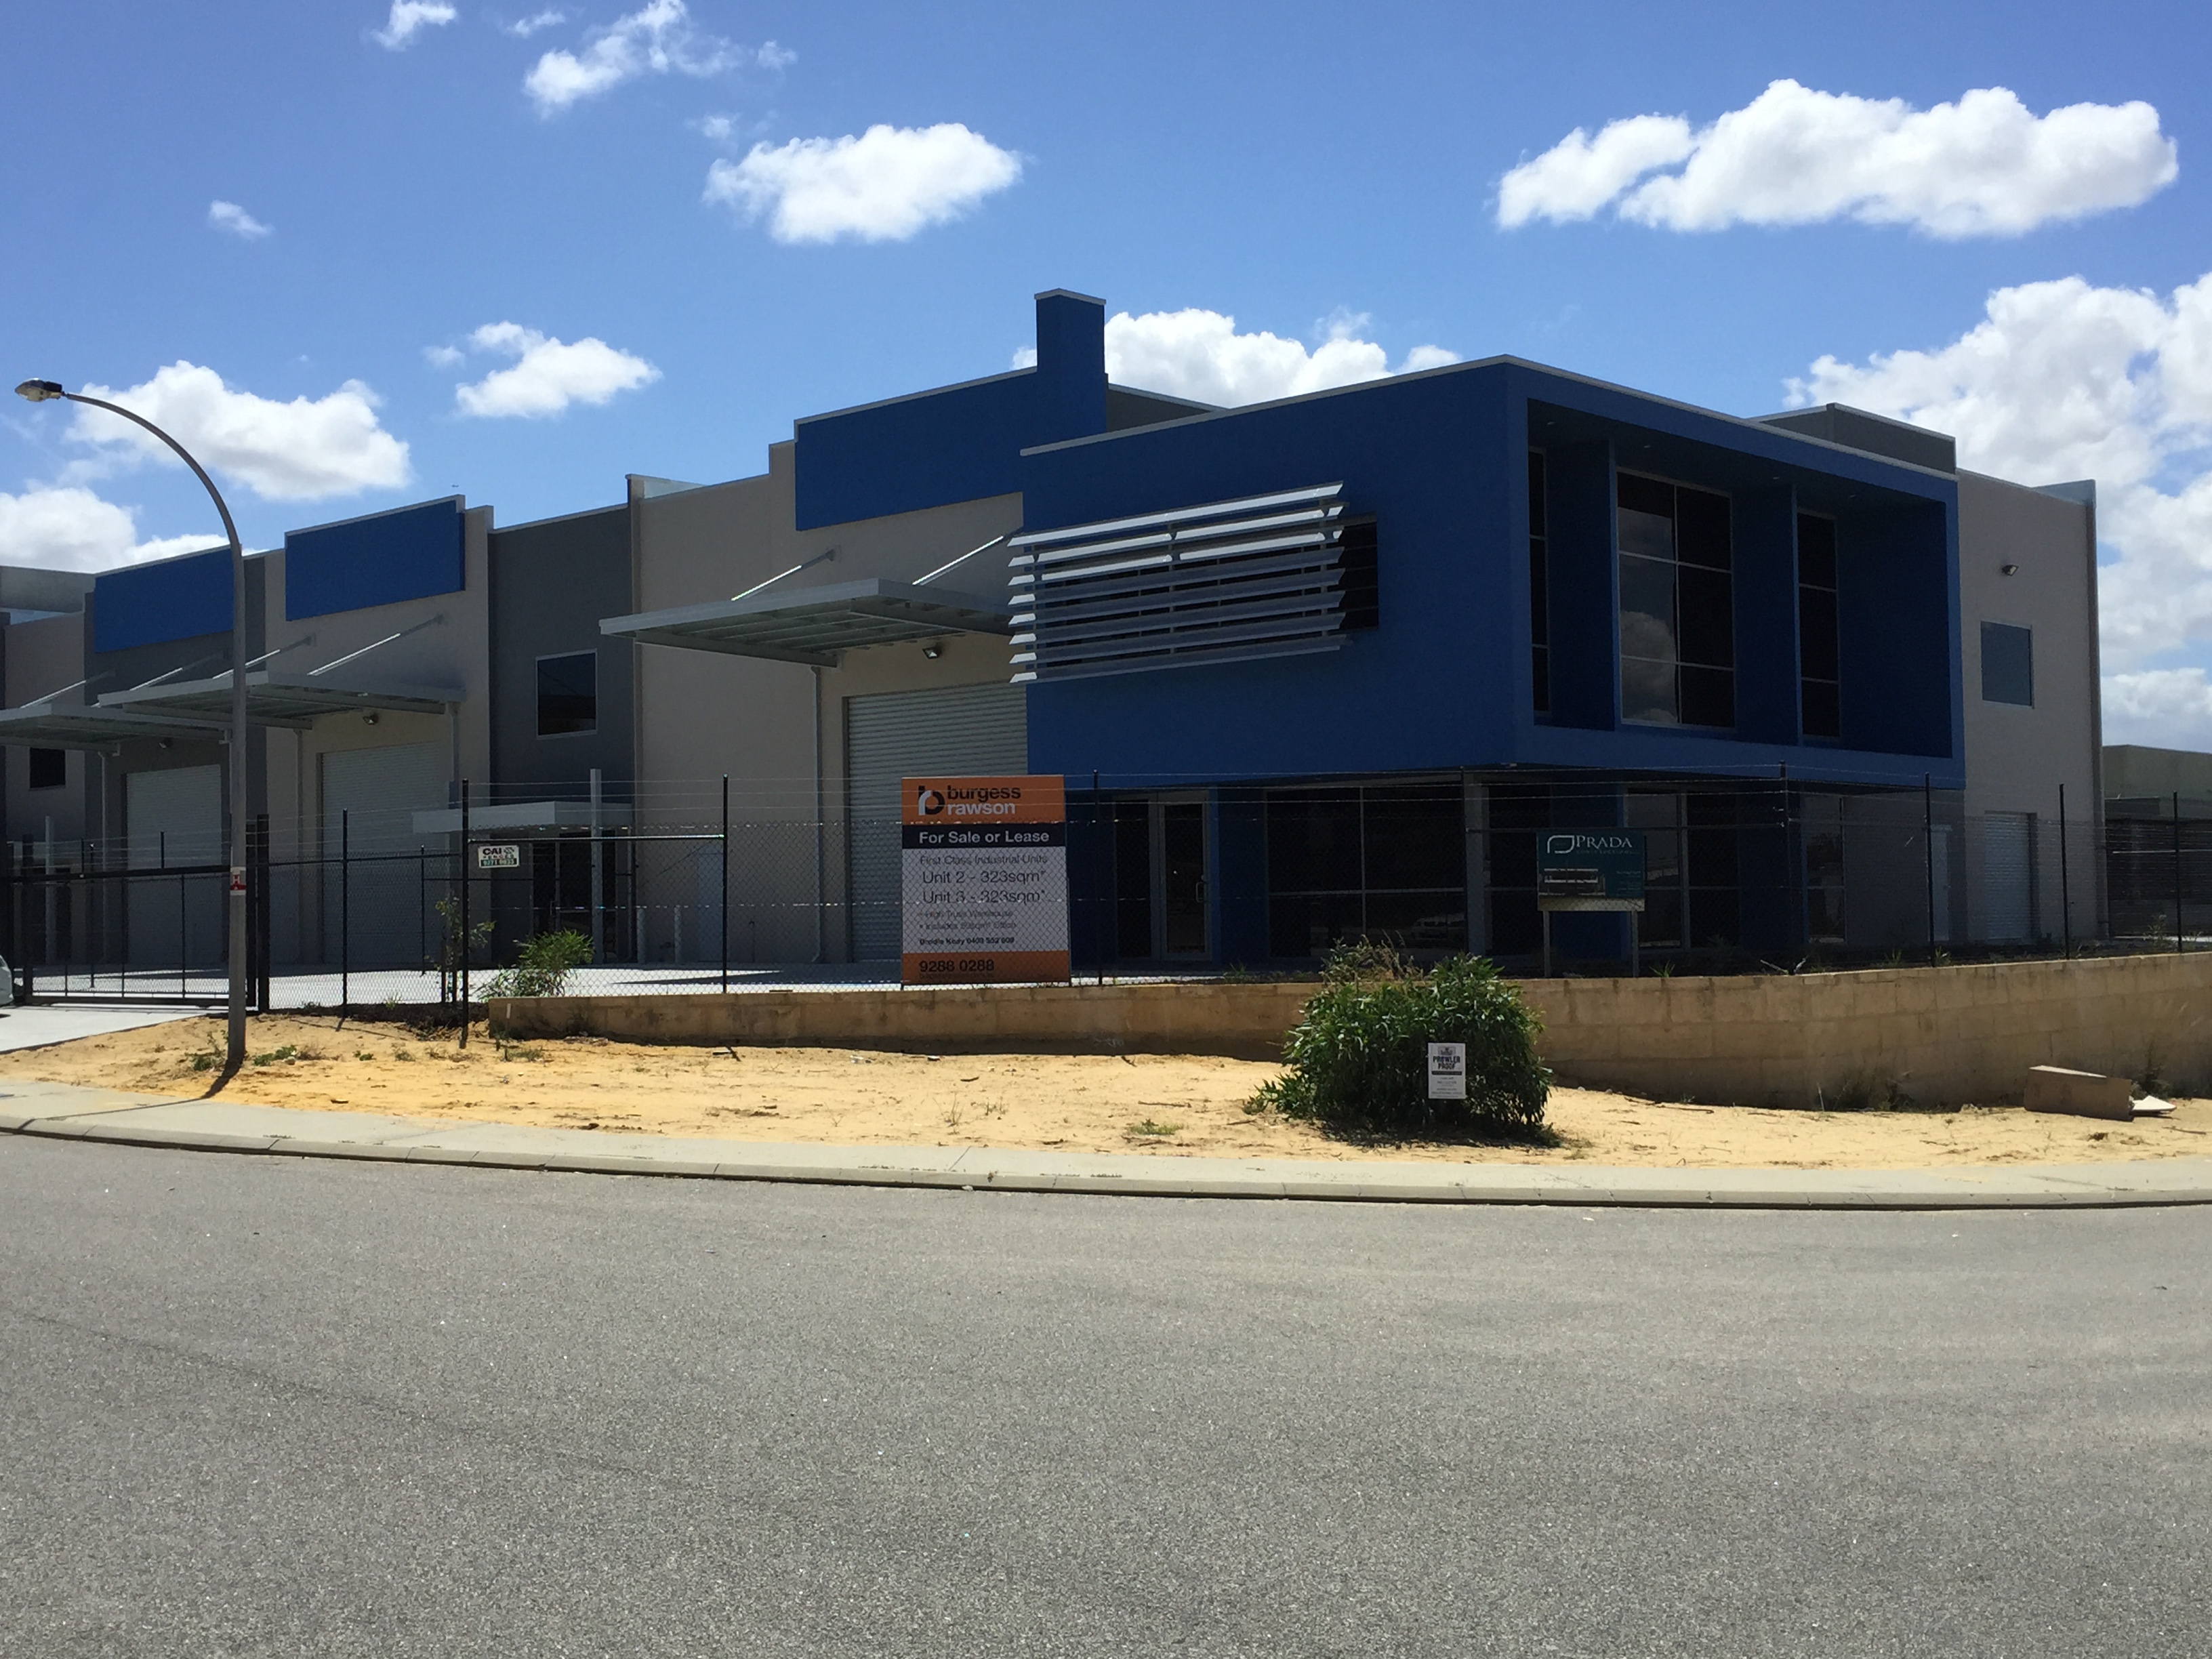 Exterior shot of commercial warehouse office unit, painted in dark blue and grey tones